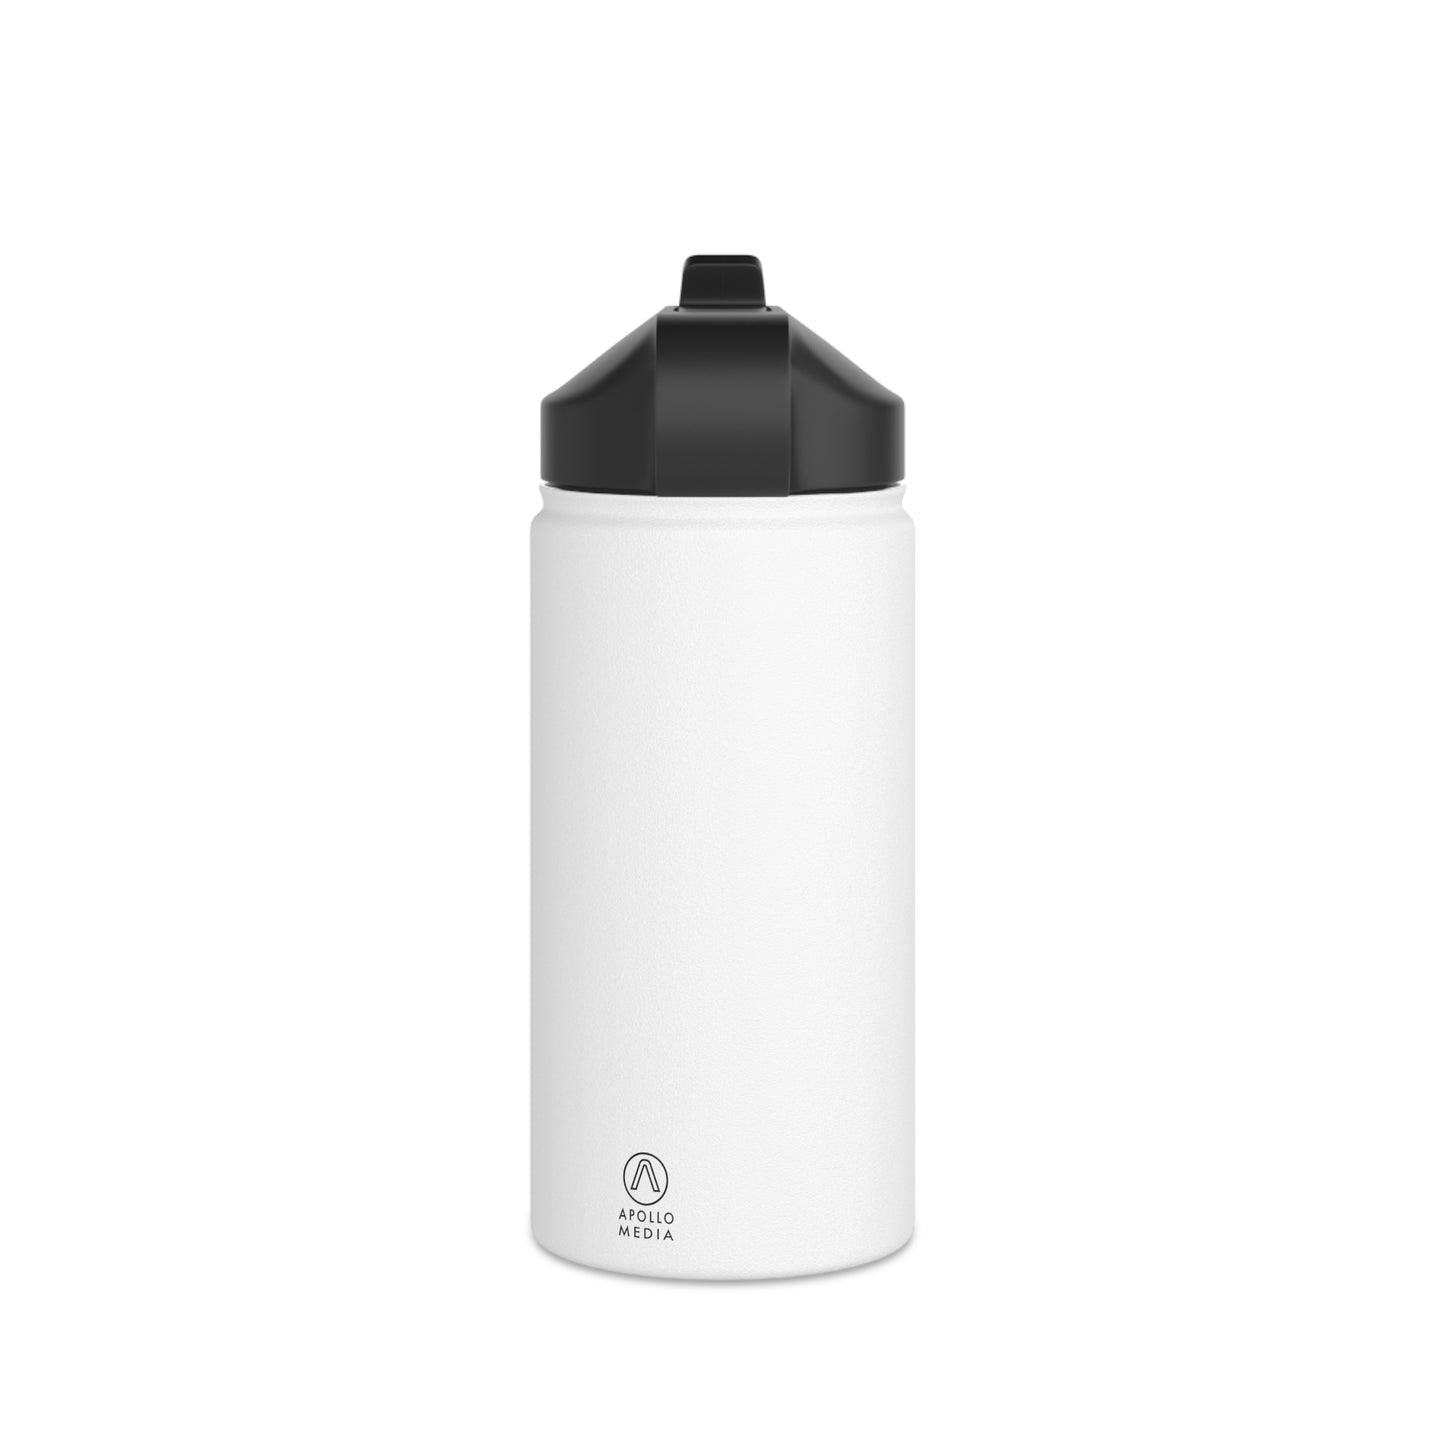 H-Town vs Everyone Stainless Steel Water Bottle